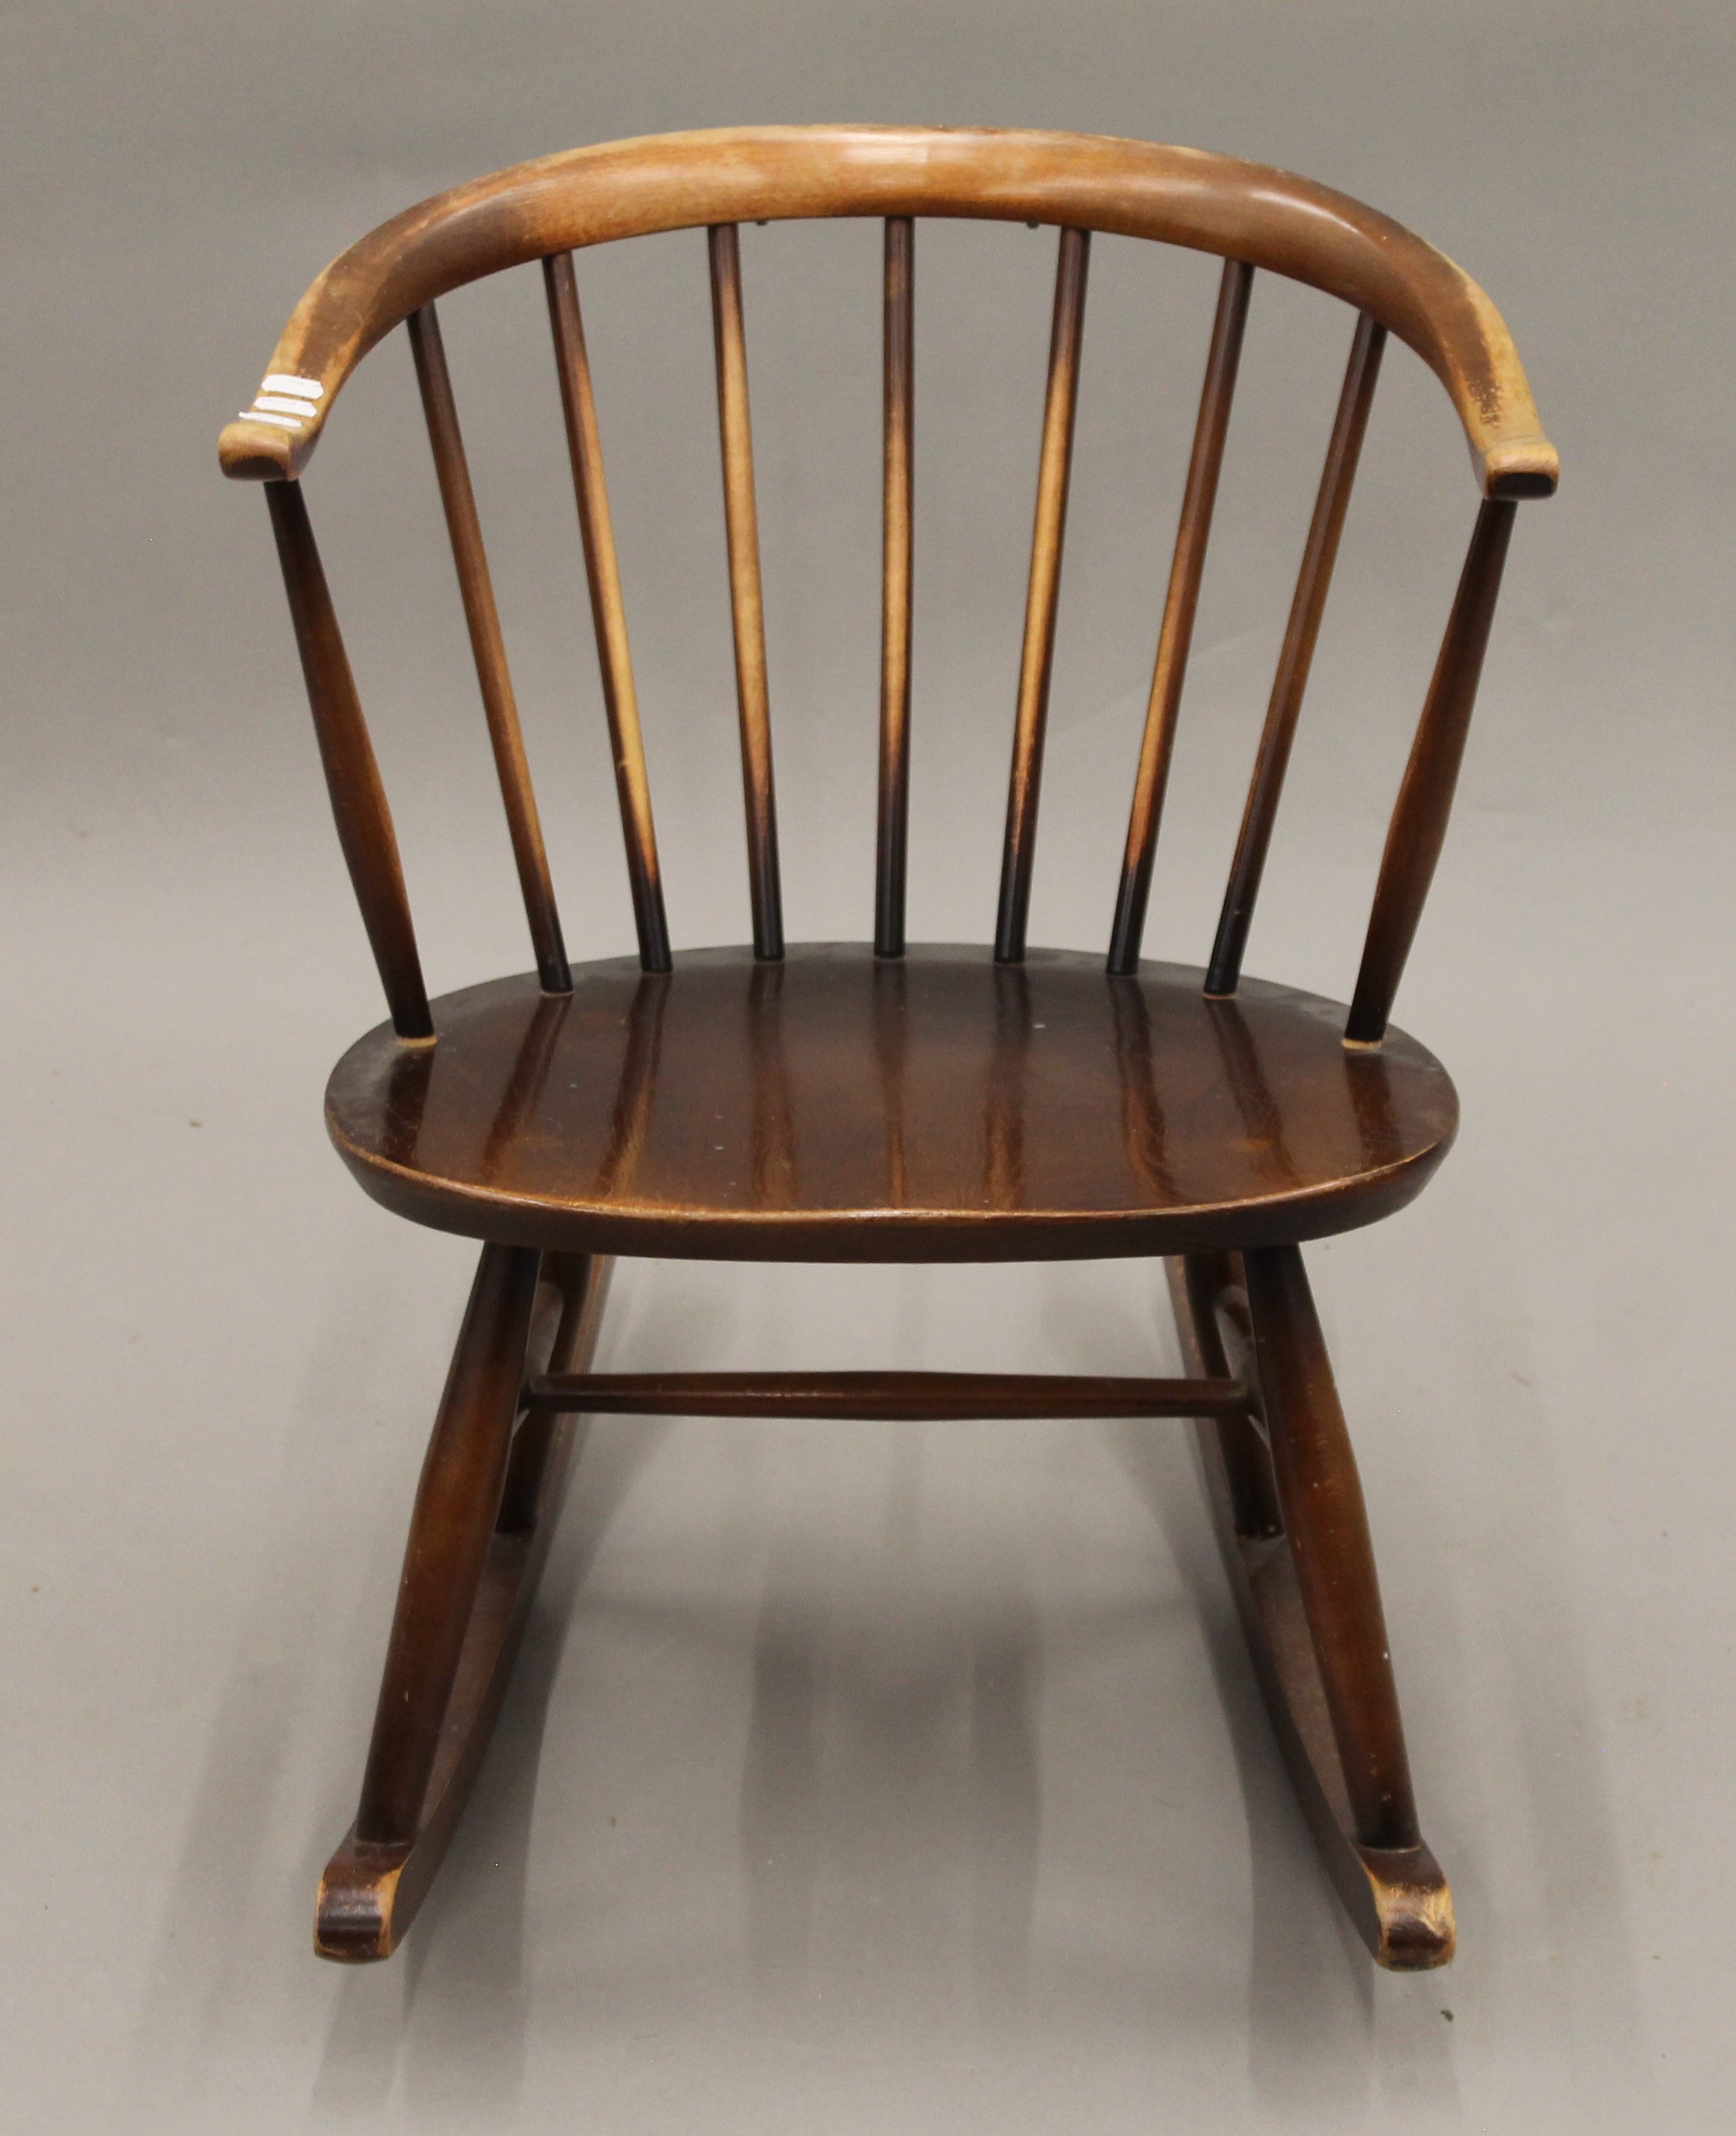 A mid-20th century rocking chair. - Image 5 of 6